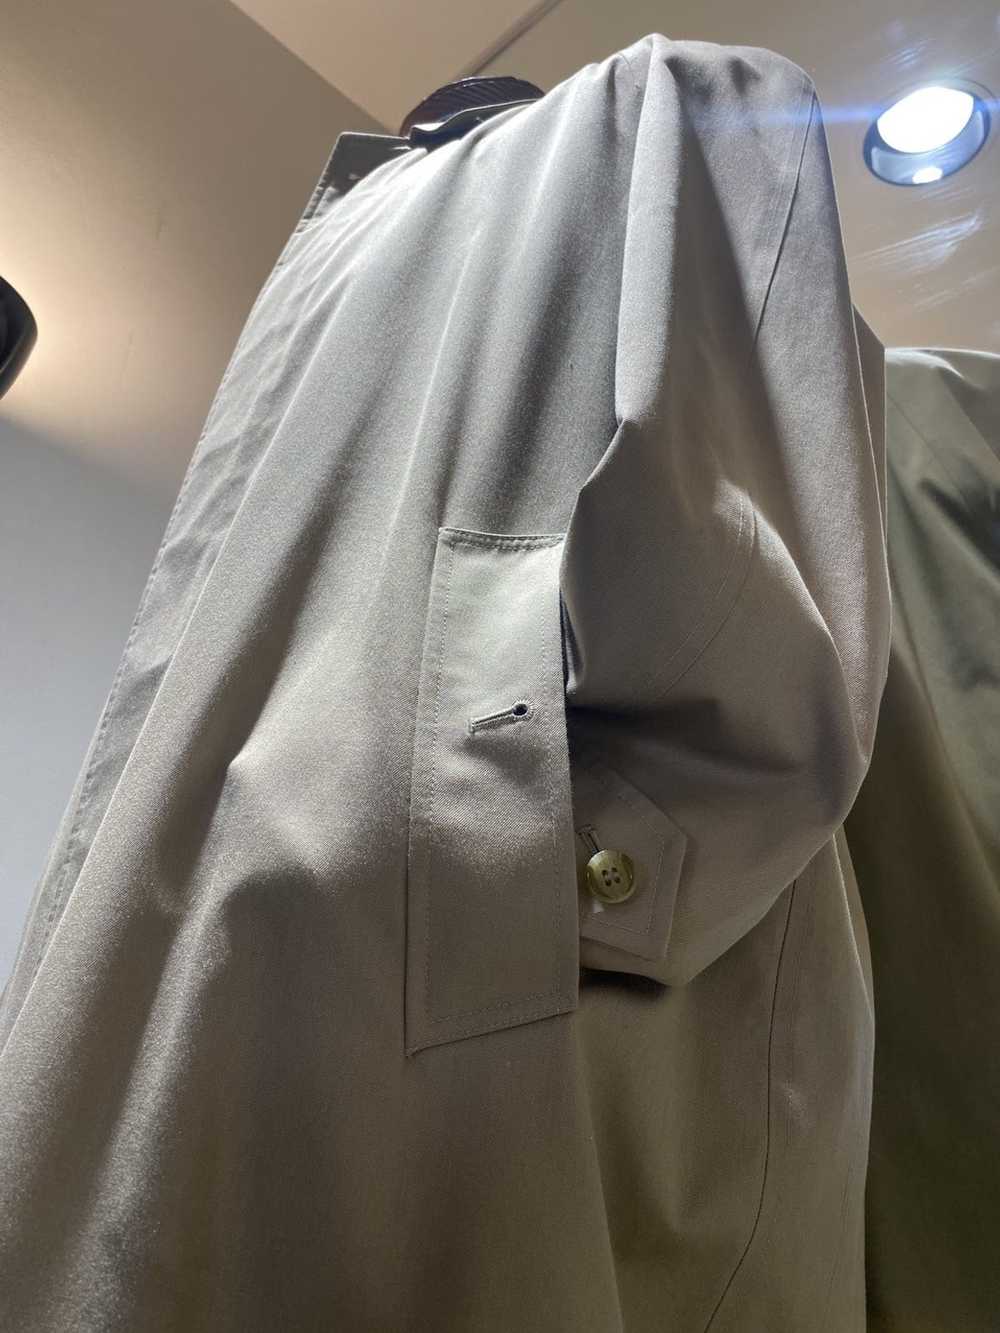 Burberry Burberrys’ of London Beige Trench Coat - image 5